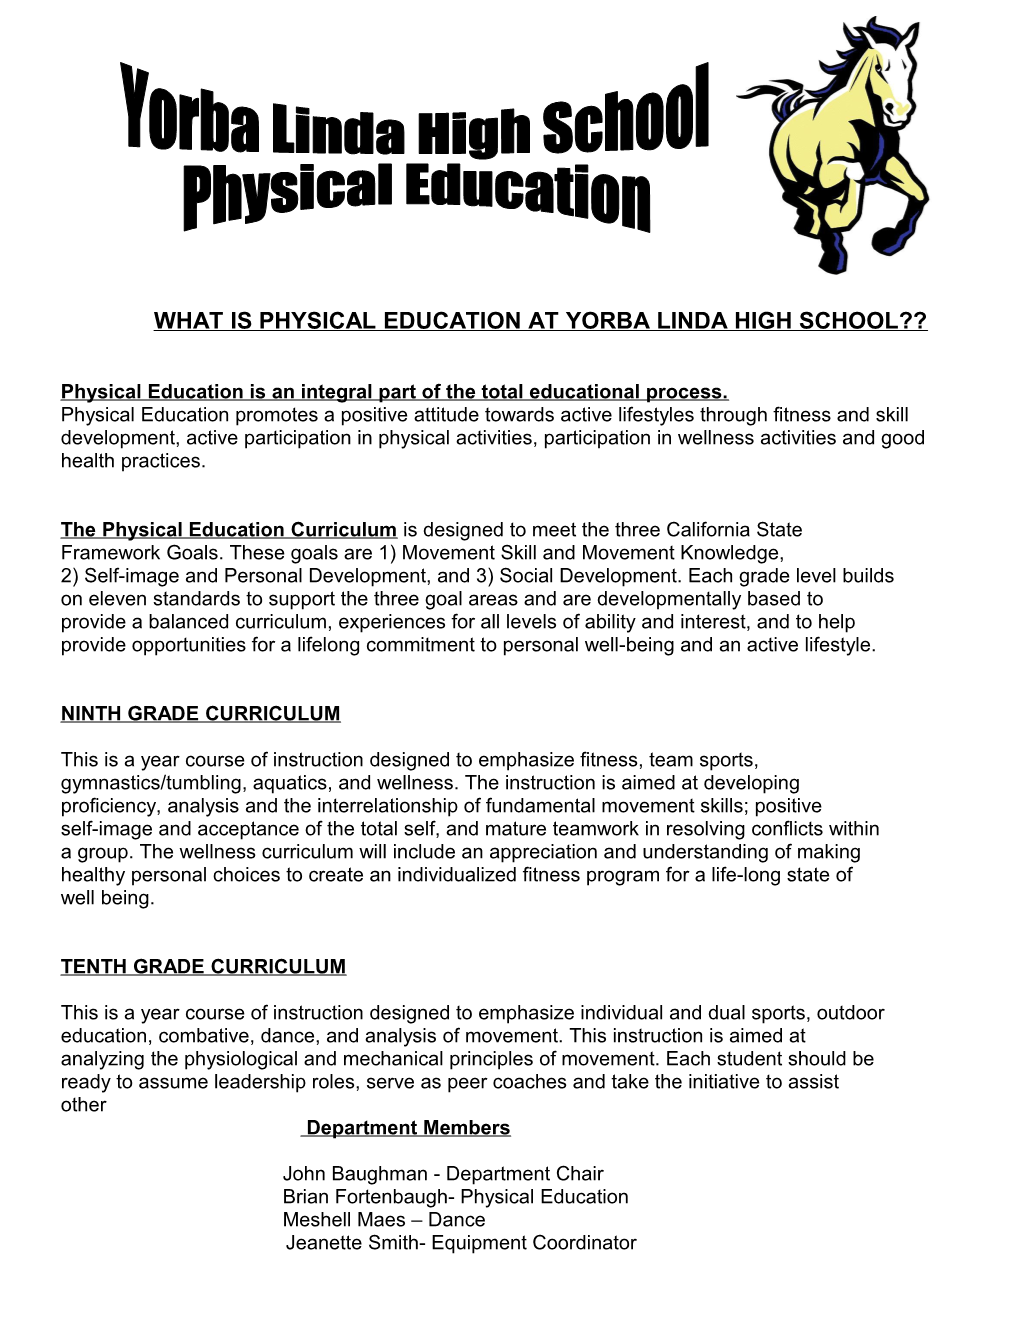 What Is Physical Education at Yorba Linda High School